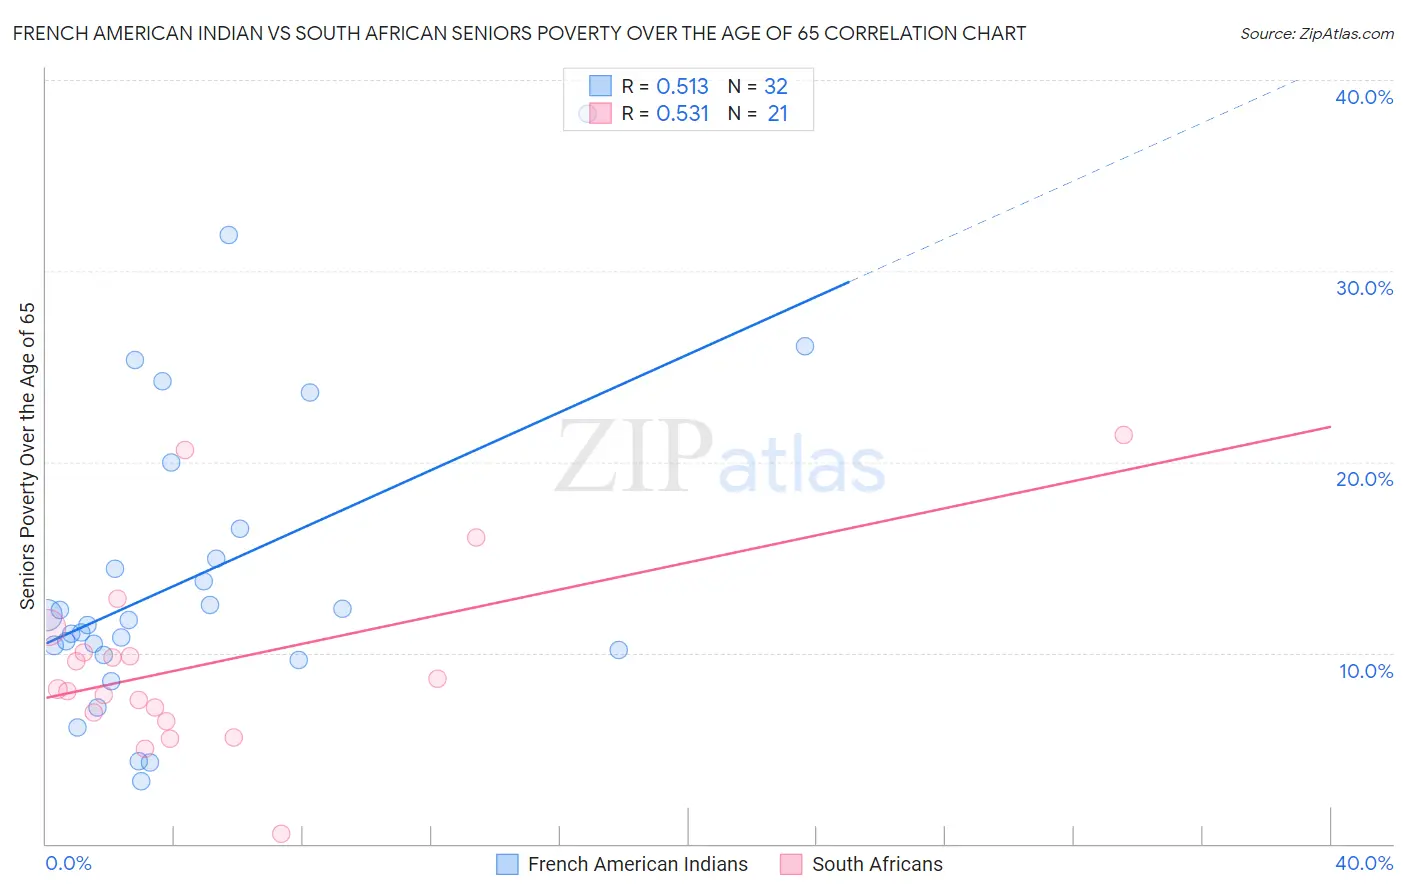 French American Indian vs South African Seniors Poverty Over the Age of 65